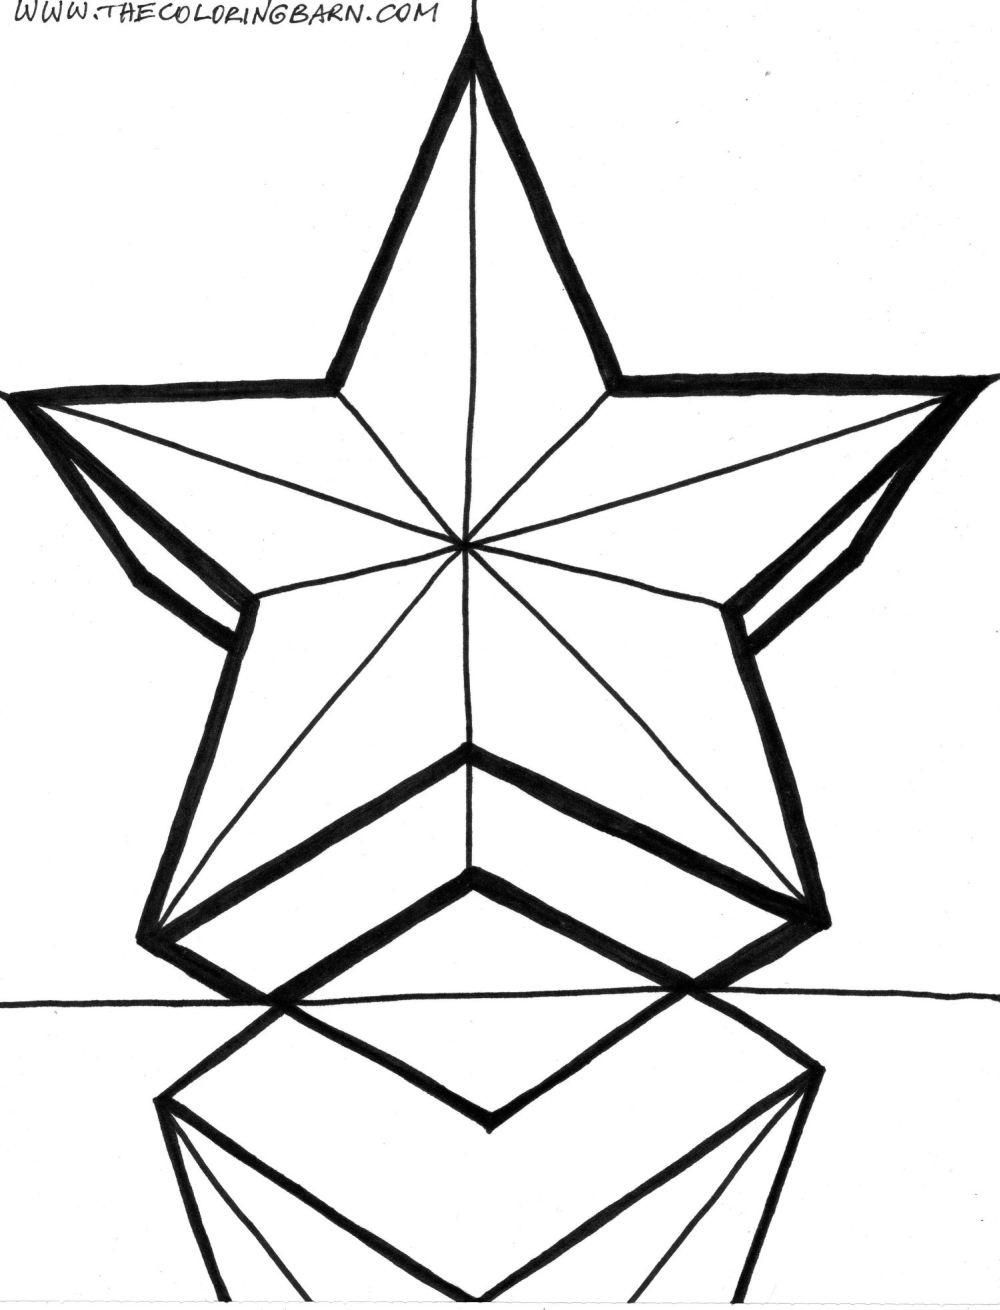 Star Color Sheet | Free Coloring Pages On Masivy World - Coloring Home - Free Printable Christmas Star Coloring Pages